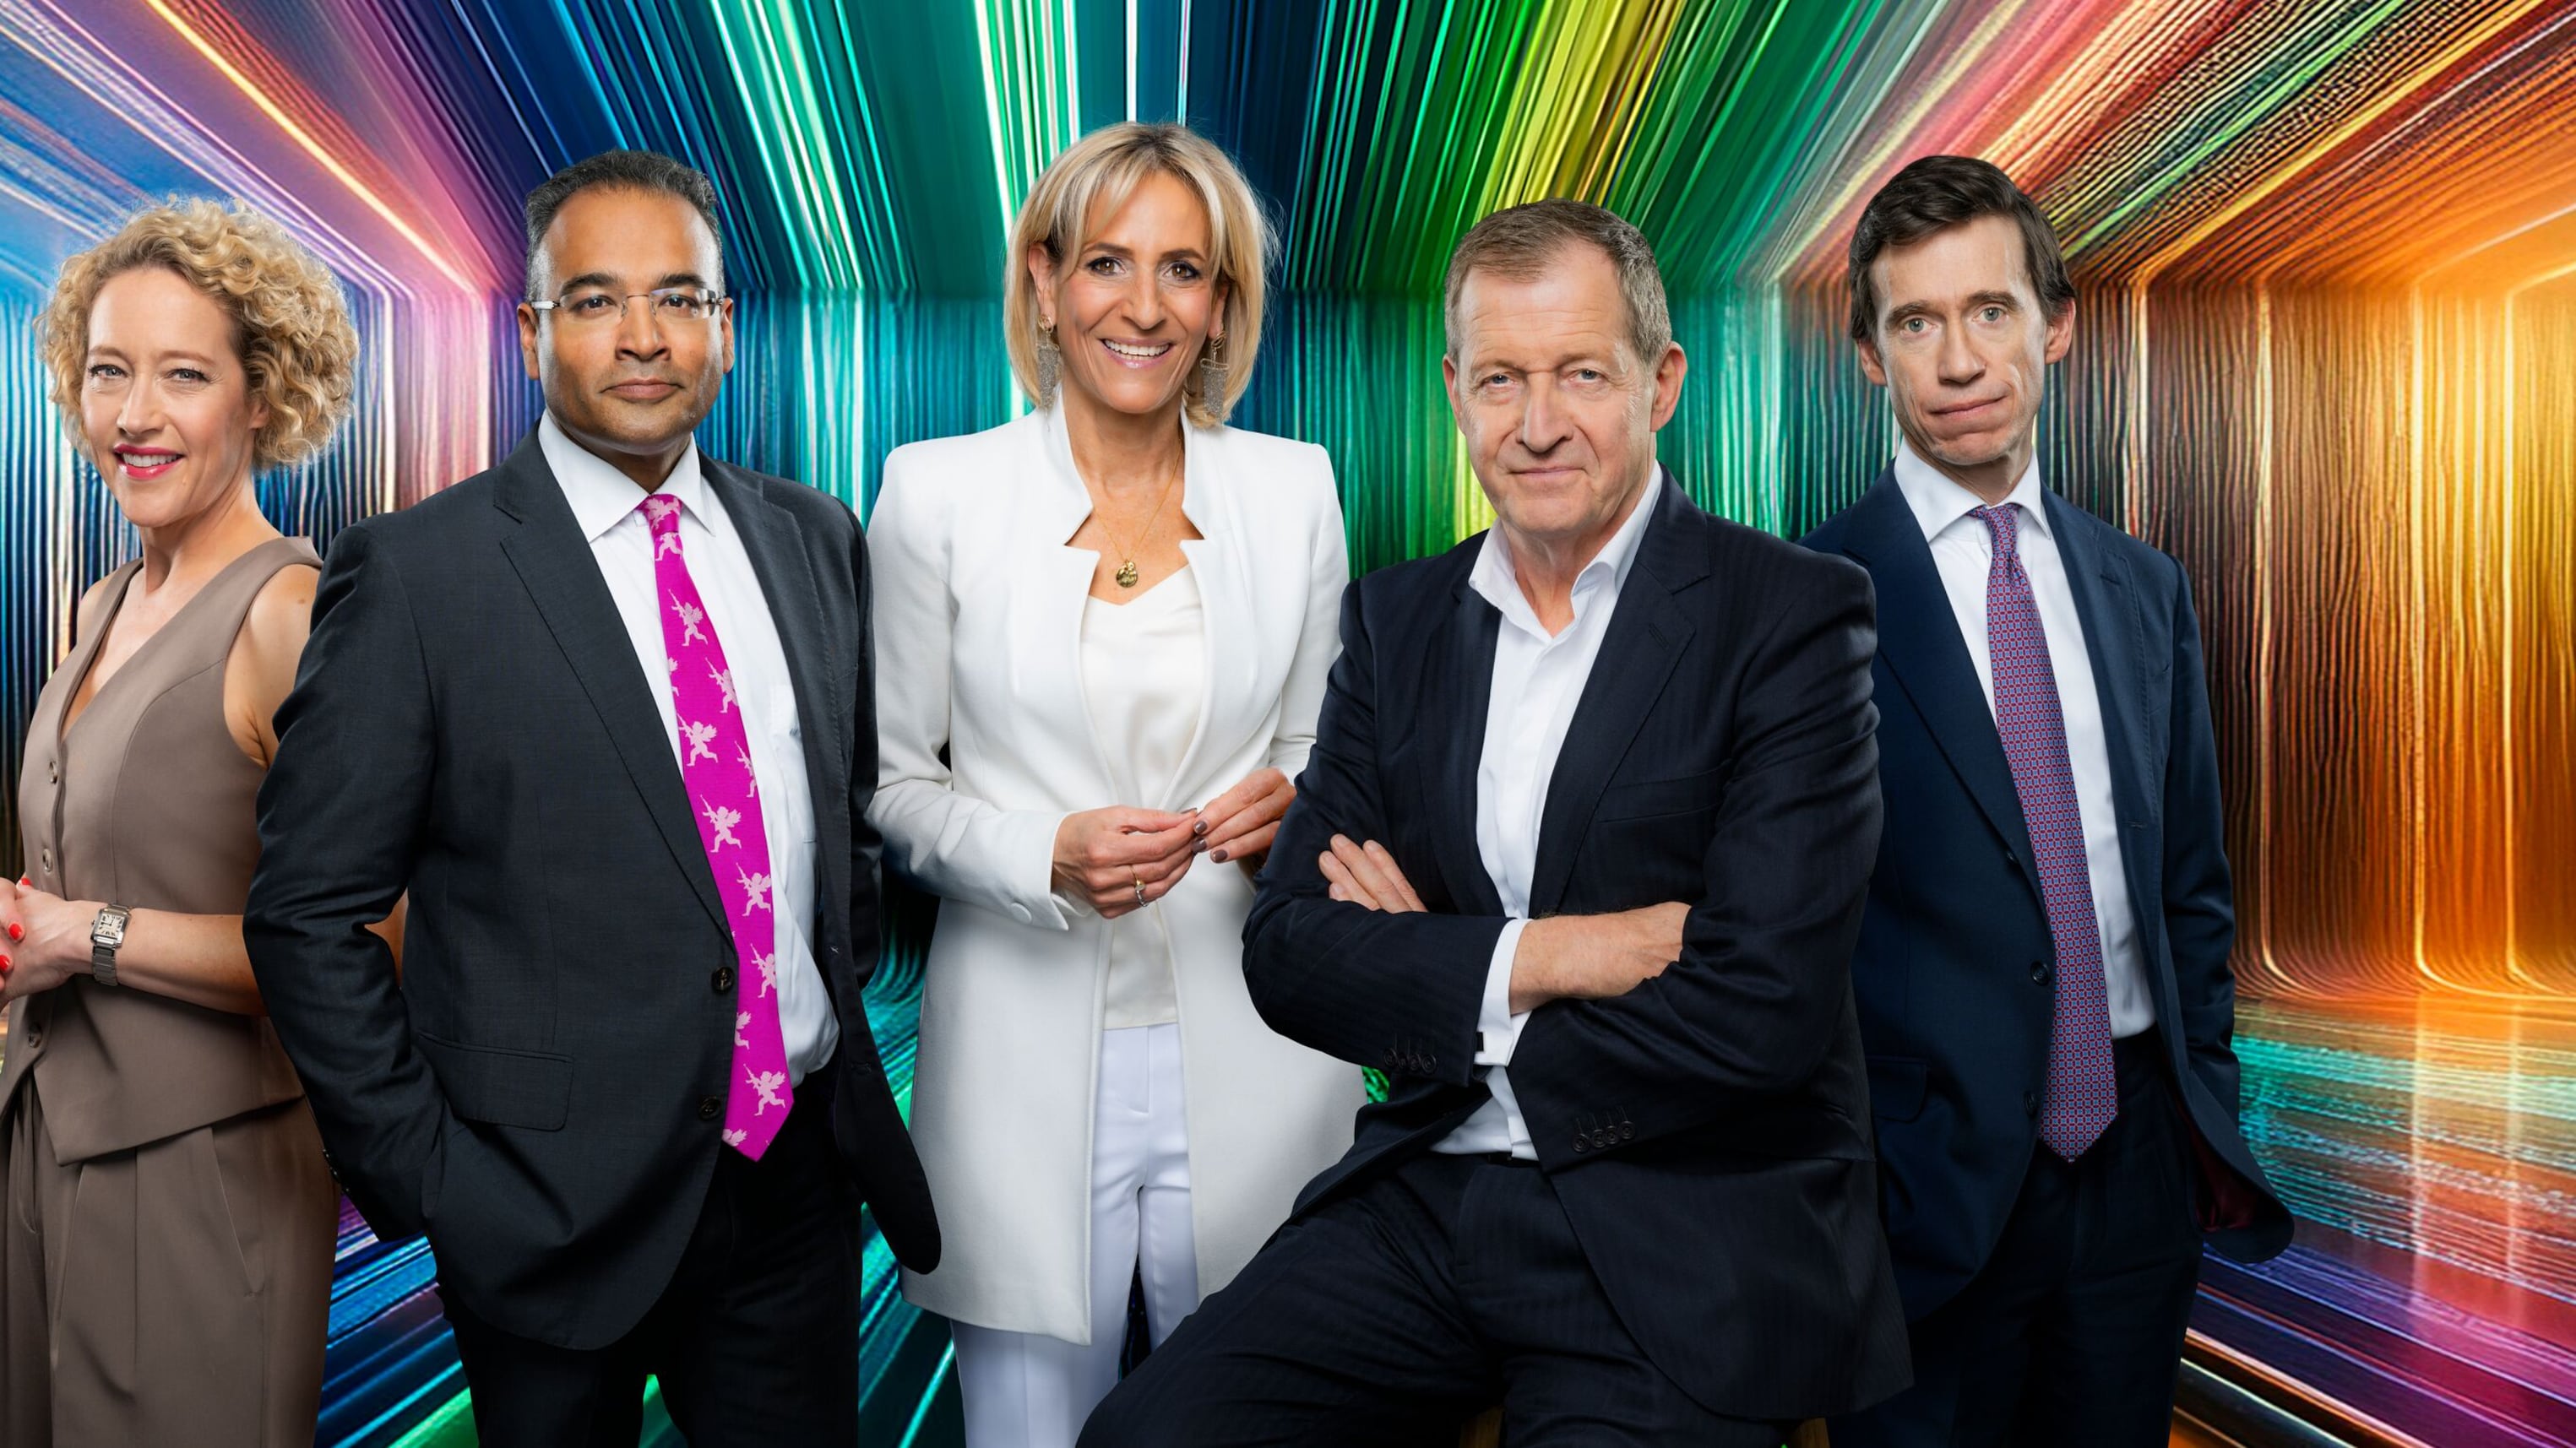 Cathy Newman, Krishnan Guru-Murthy, Emily Maitlis, Alastair Campbell and Rory Stewart will be among those on Channel 4’s coverage